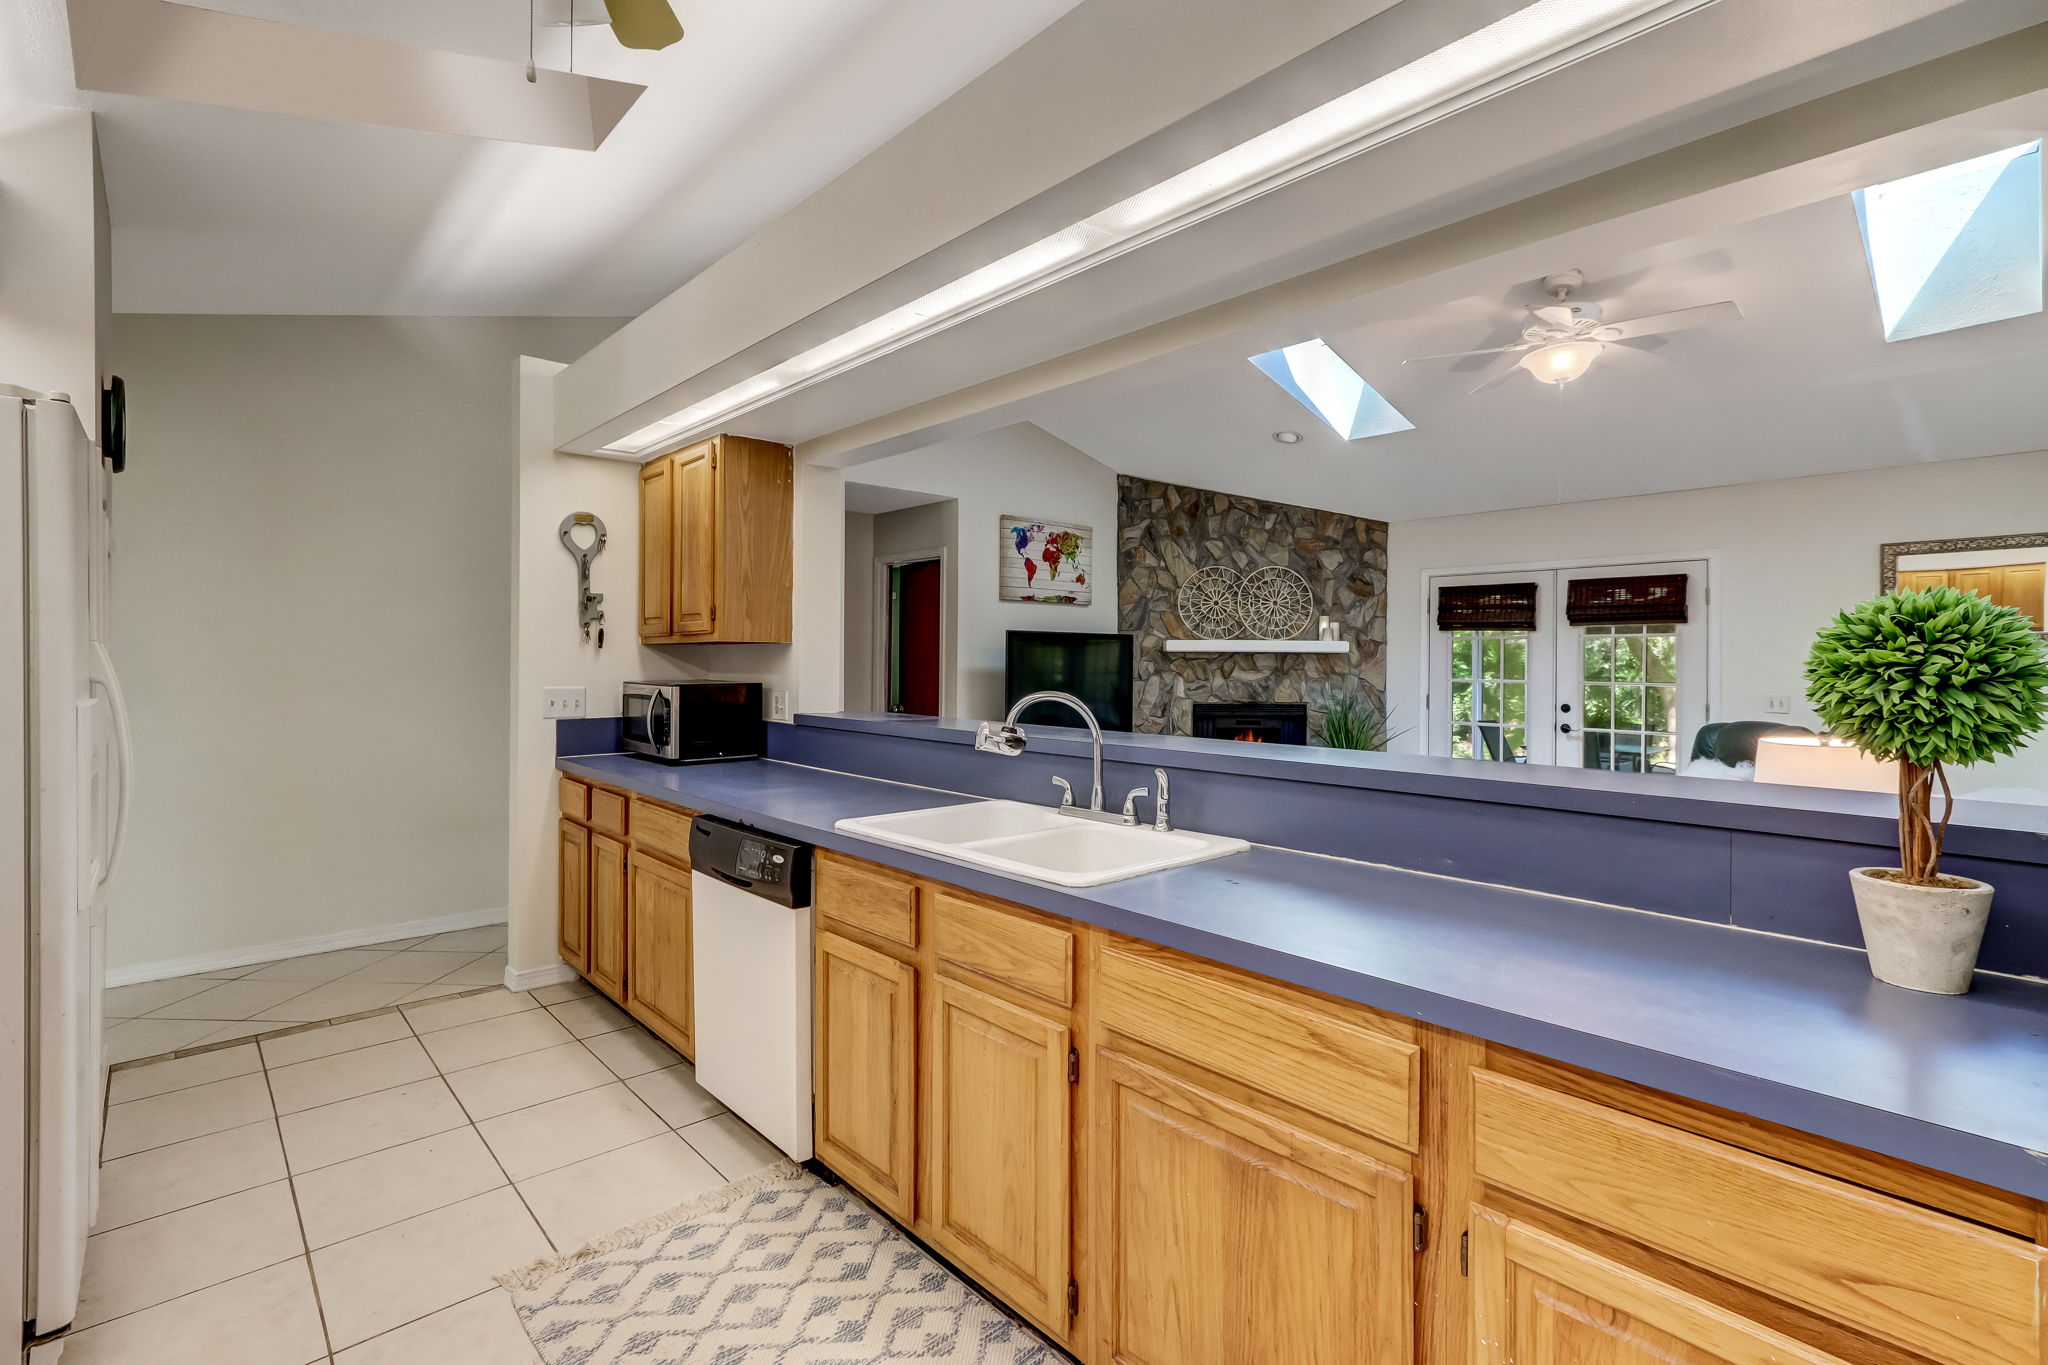 Enjoy eat-in counter bar and open line-of-sight from kitchen to living